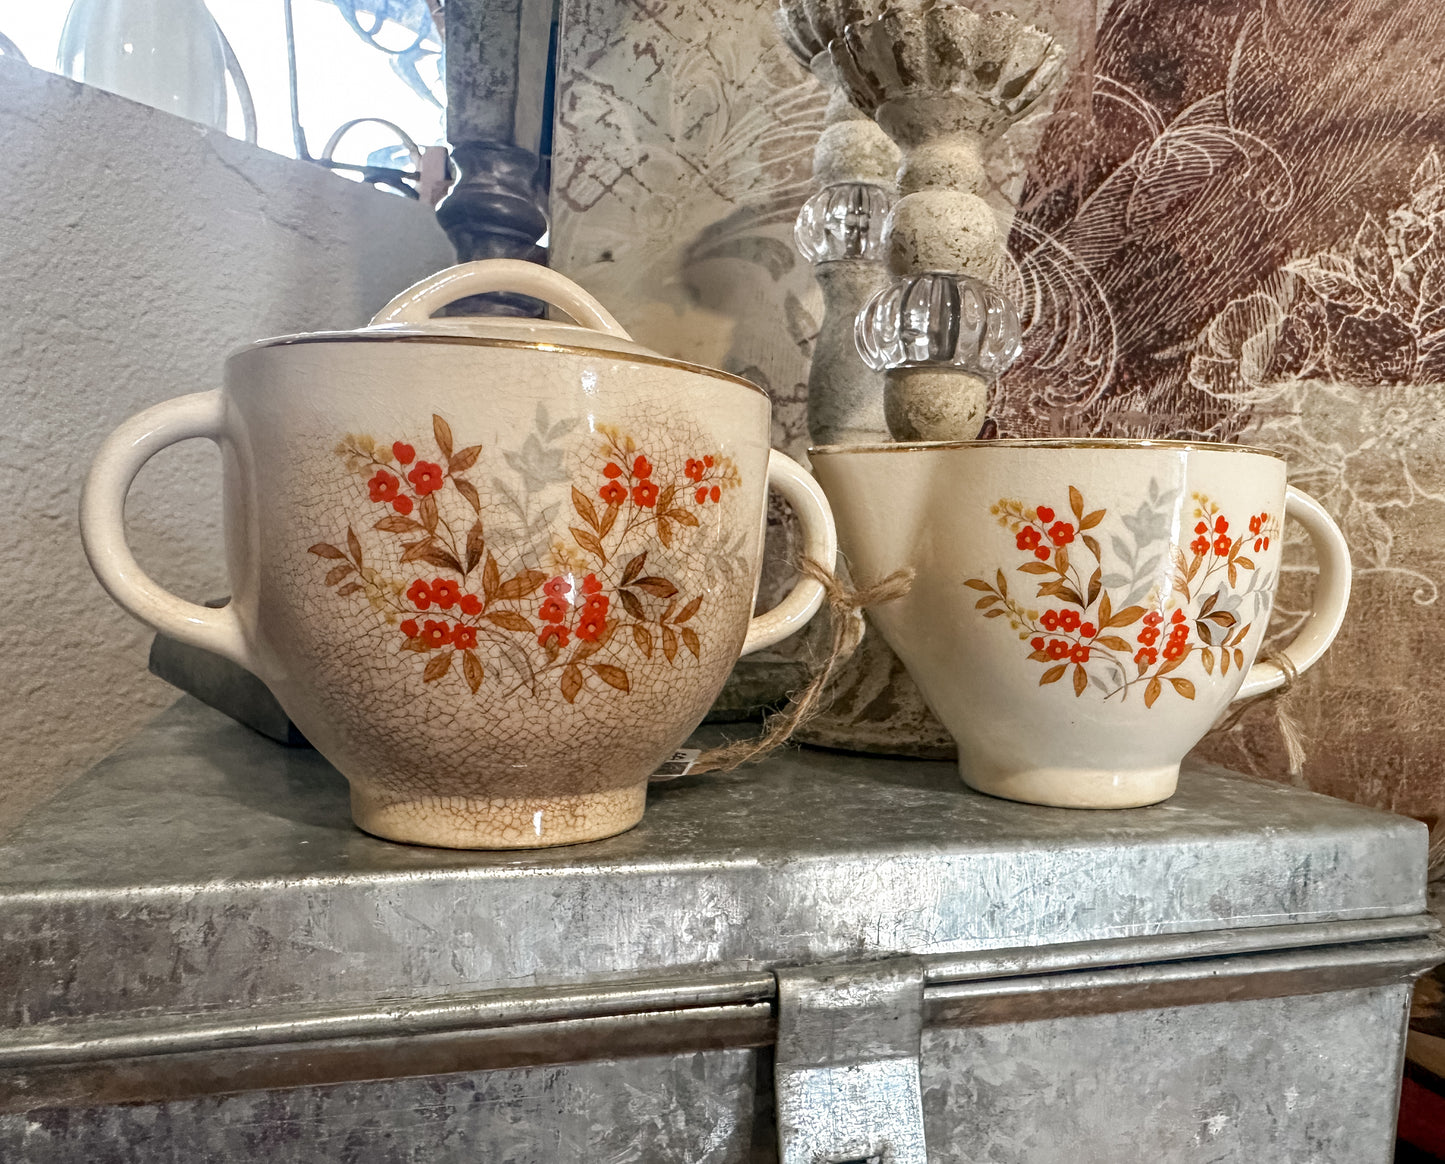 Vintage Sugar & Creamer Set-Stained & Crazed Beautifully! Video included